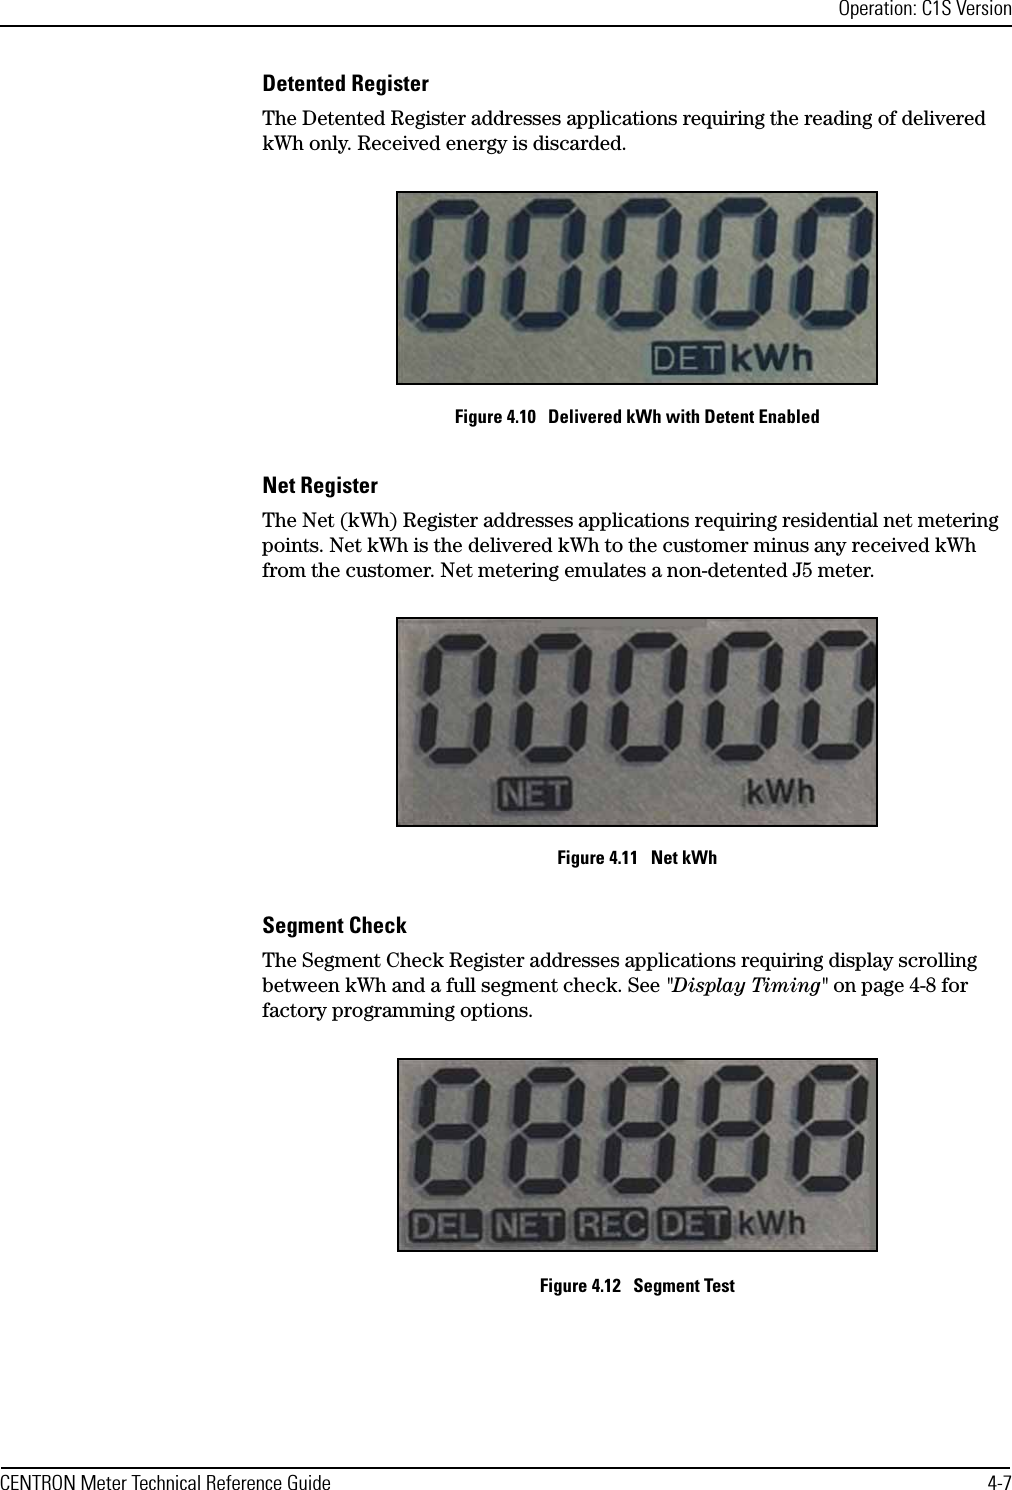 Operation: C1S VersionCENTRON Meter Technical Reference Guide 4-7Detented RegisterThe Detented Register addresses applications requiring the reading of delivered kWh only. Received energy is discarded.Figure 4.10   Delivered kWh with Detent EnabledNet RegisterThe Net (kWh) Register addresses applications requiring residential net metering points. Net kWh is the delivered kWh to the customer minus any received kWh from the customer. Net metering emulates a non-detented J5 meter.Figure 4.11   Net kWhSegment CheckThe Segment Check Register addresses applications requiring display scrolling between kWh and a full segment check. See &quot;Display Timing&quot; on page 4-8 for factory programming options.Figure 4.12   Segment Test